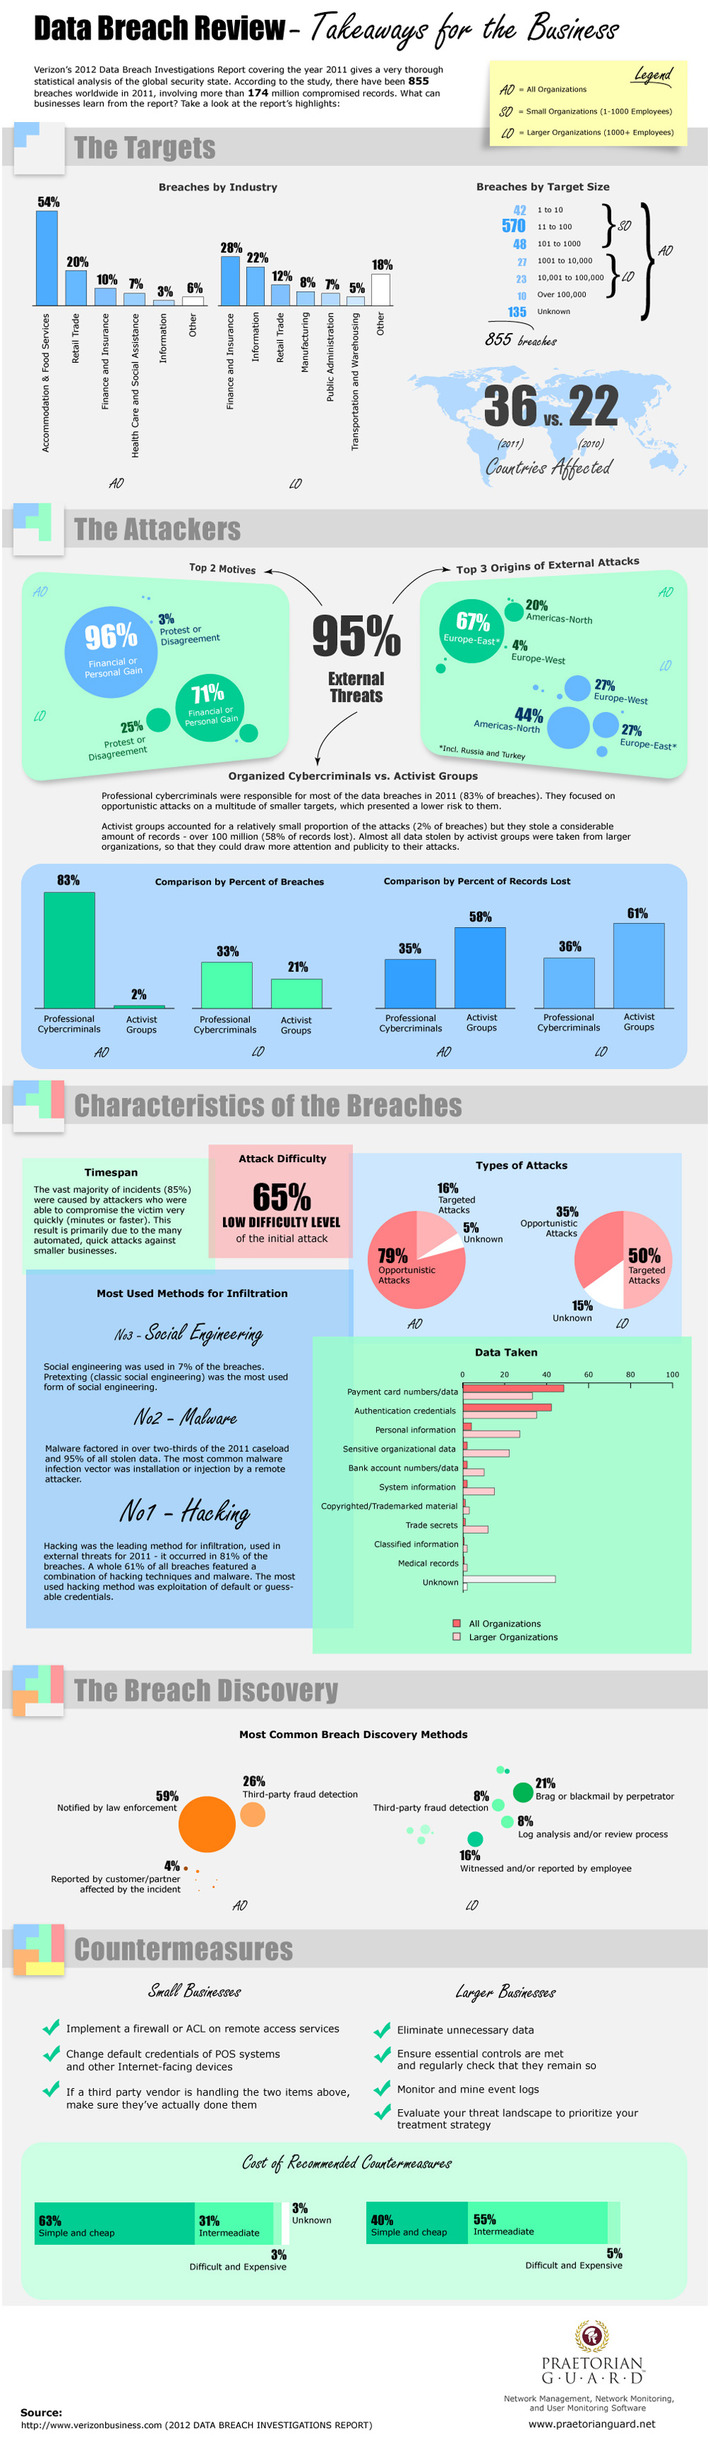 INFOGRAPHIC: : Data Breach Review | CloudTweaks | WHY IT MATTERS: Digital Transformation | Scoop.it